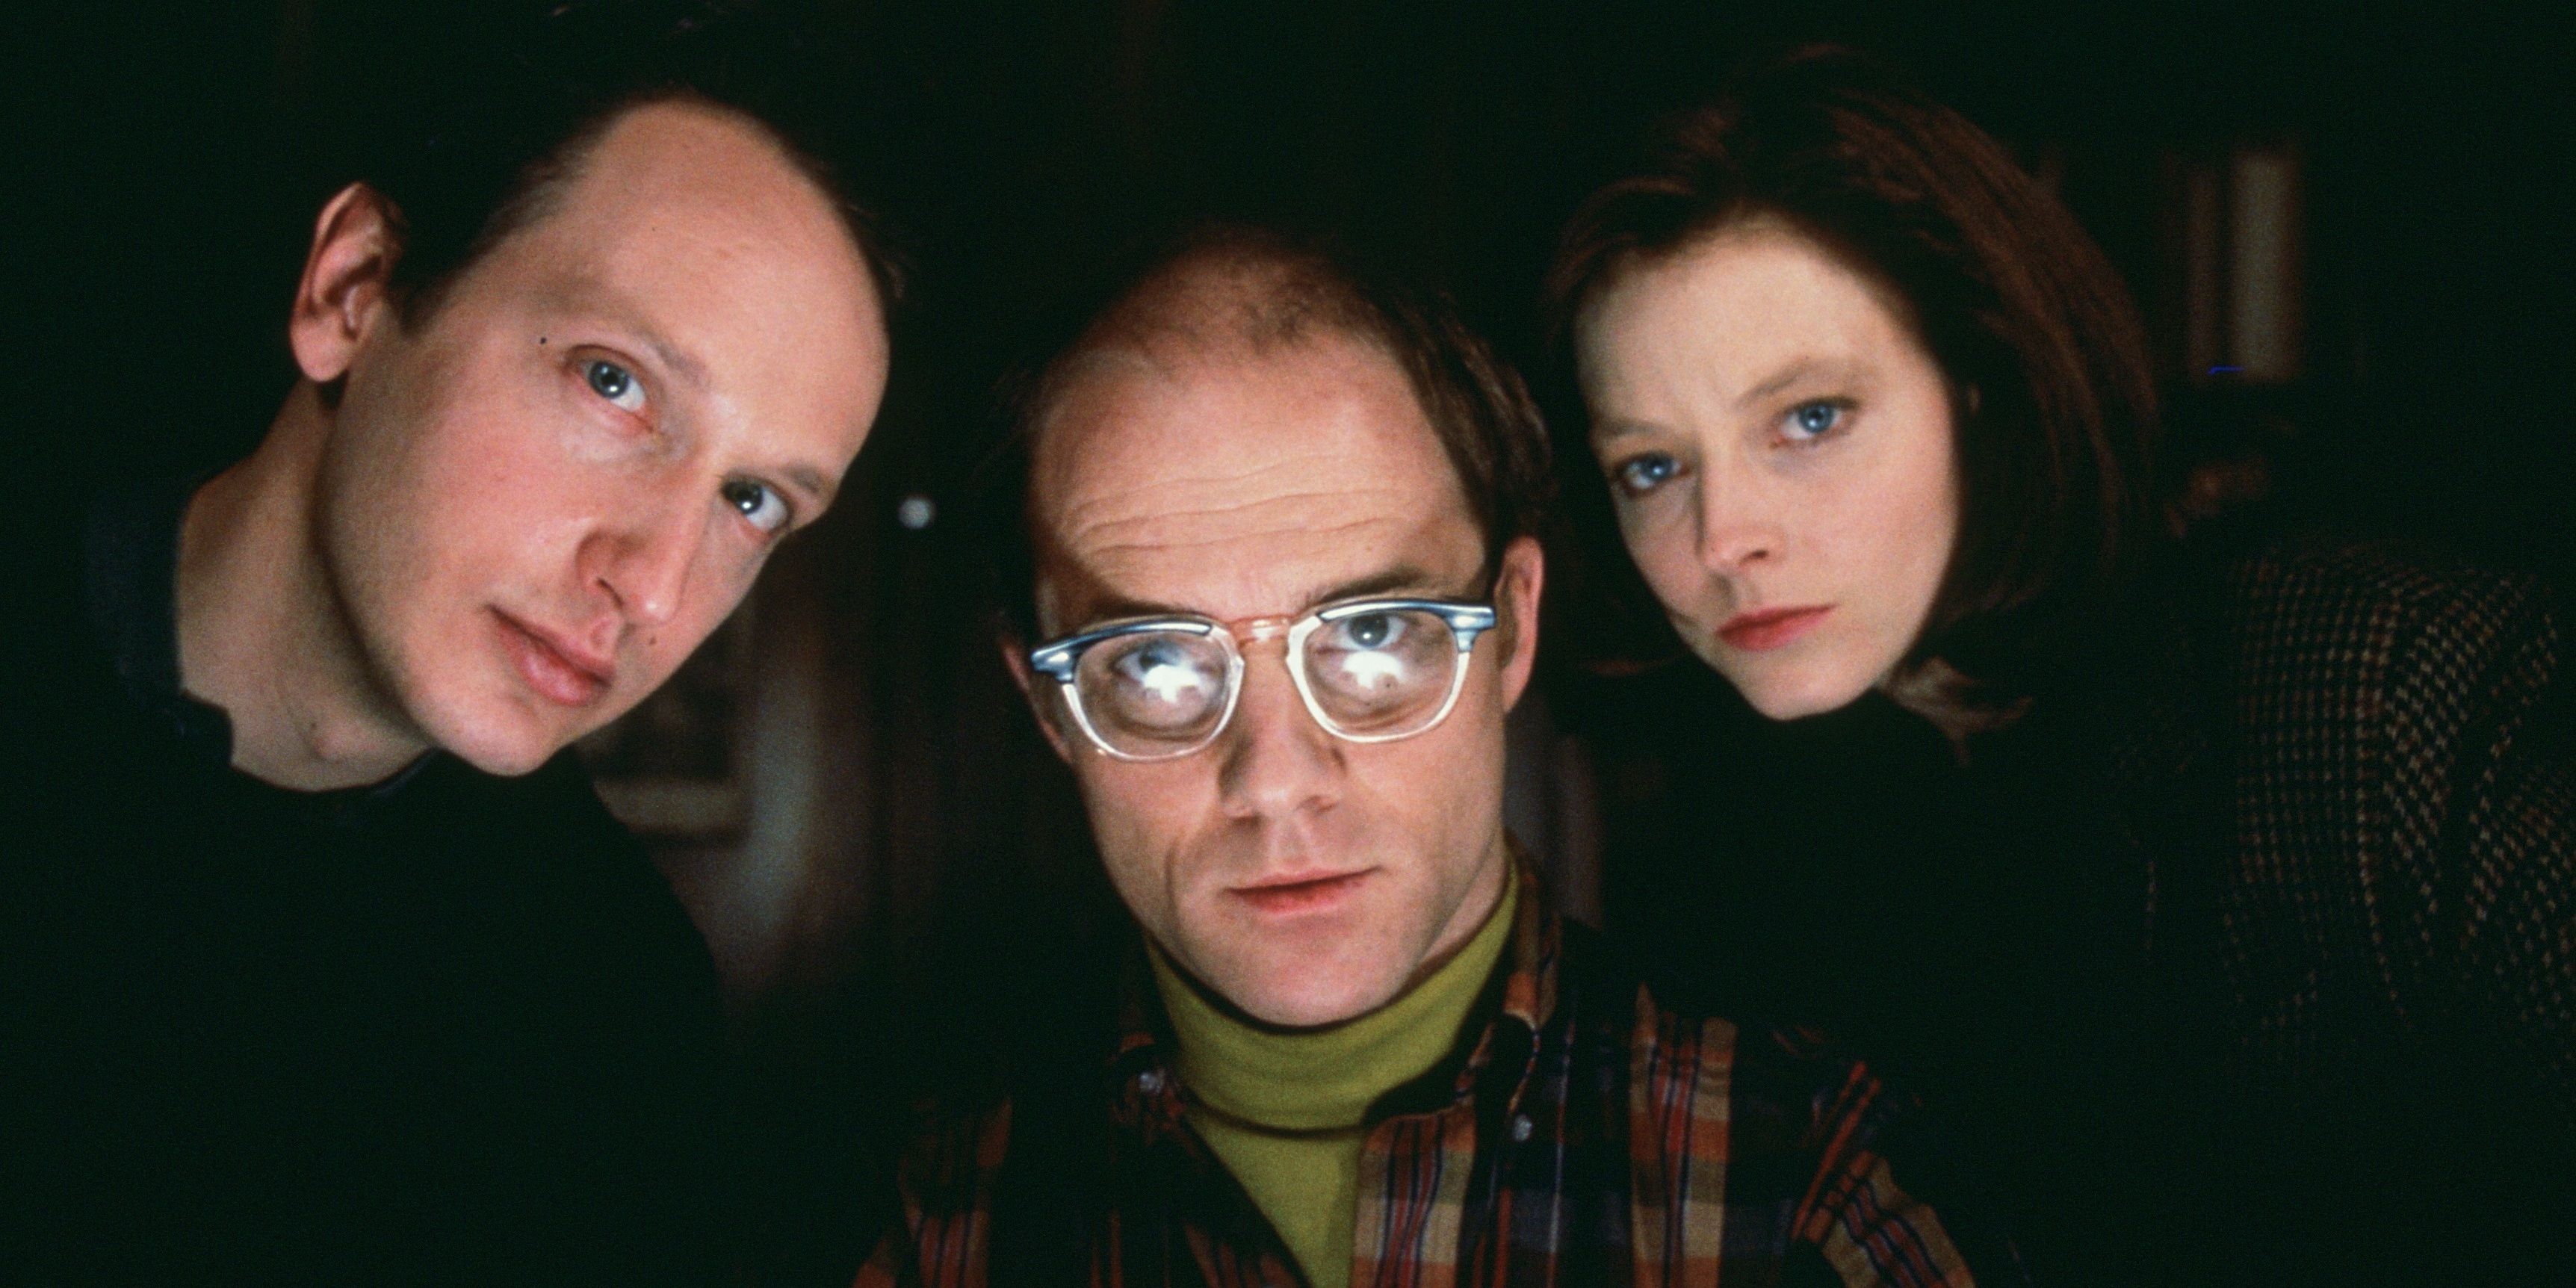 The cast of The Silence of the Lambs